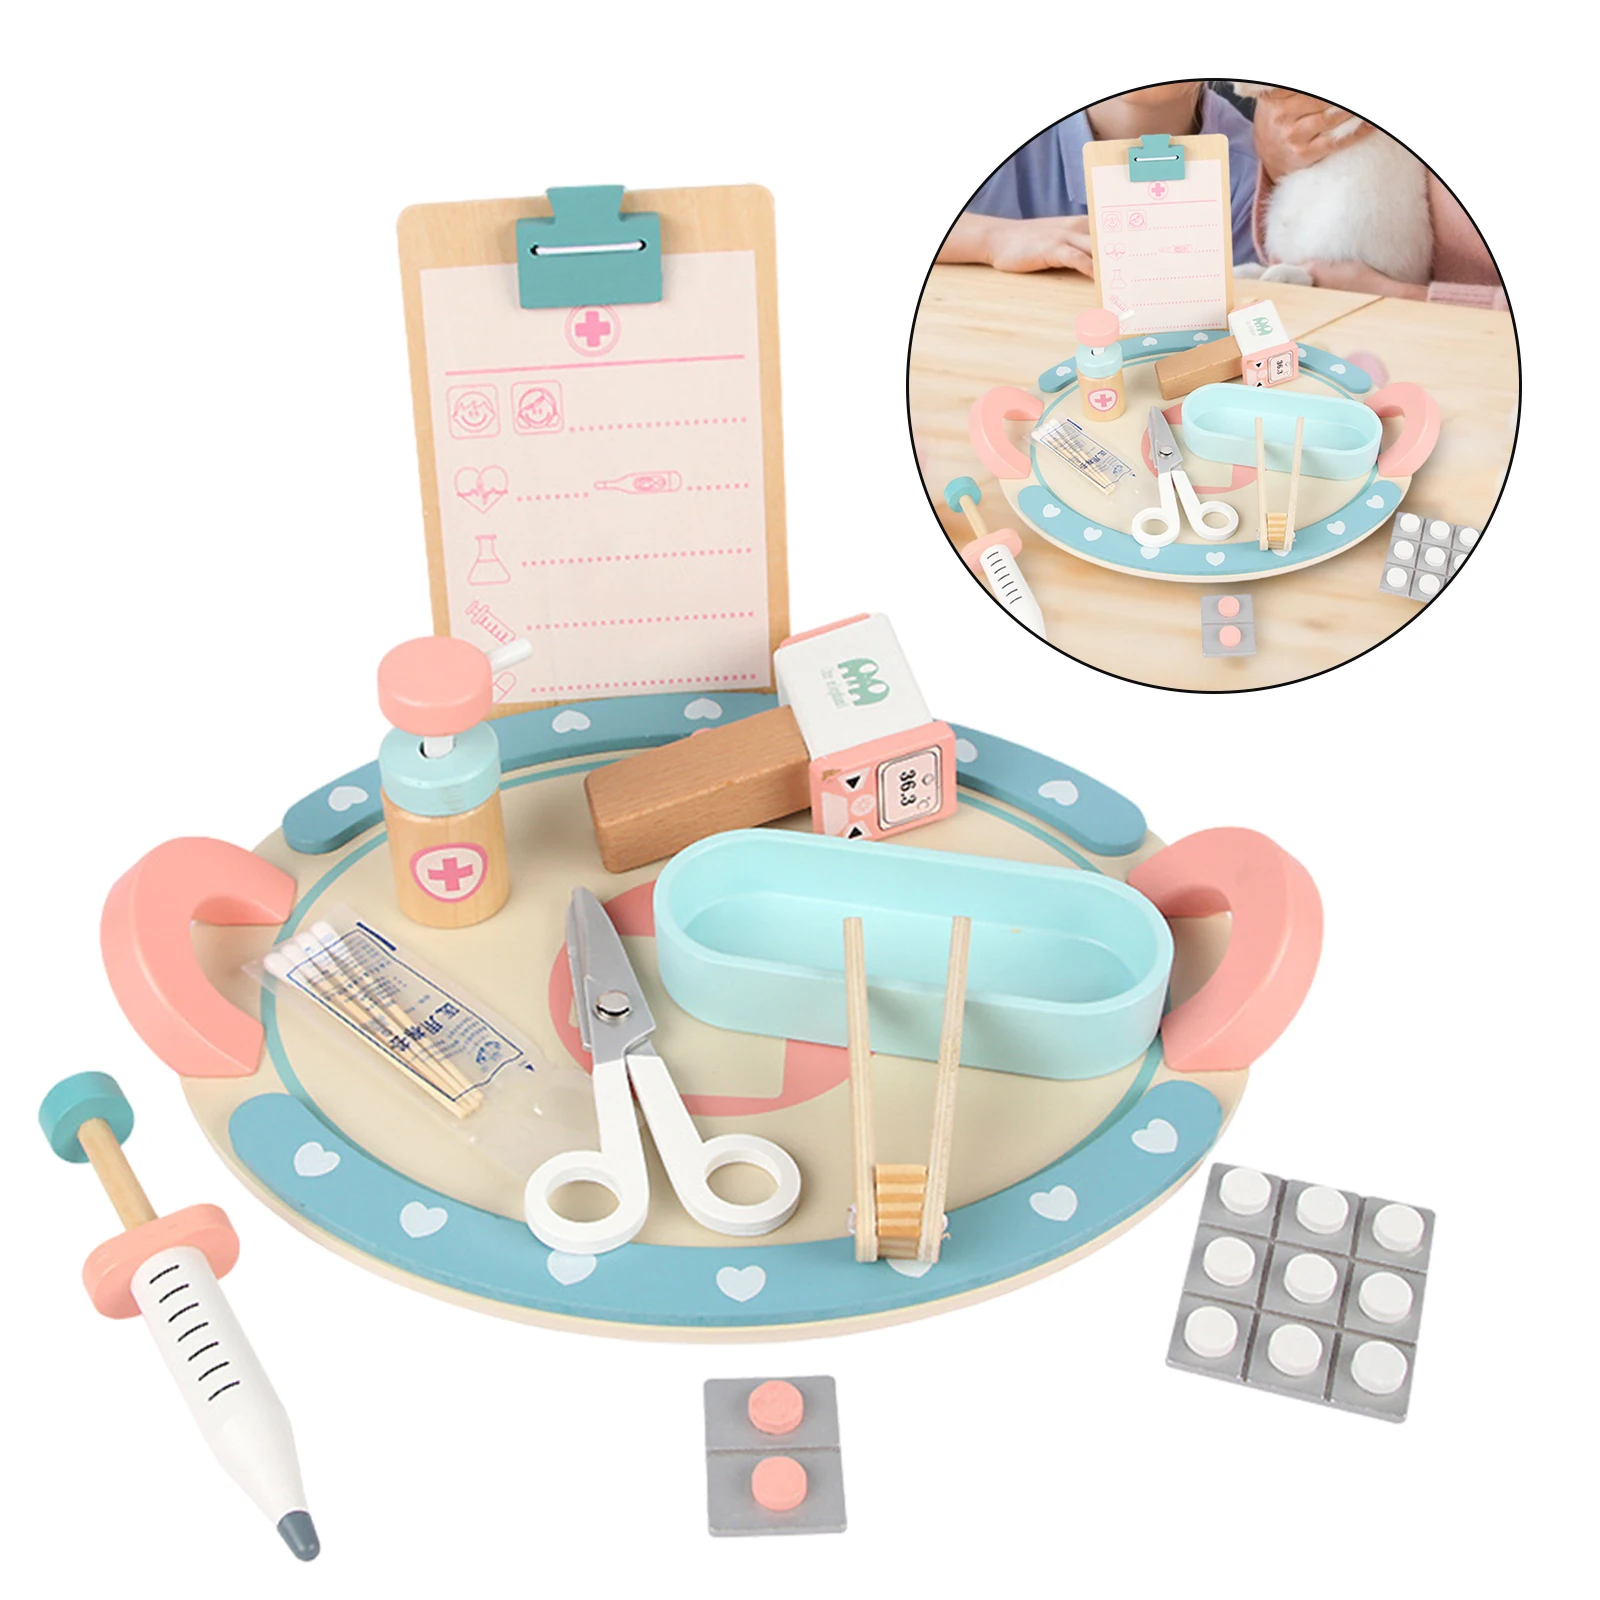 Emergency Medicine Kit Children`s Role Play Role Play Toy for 4 Year Old Boys